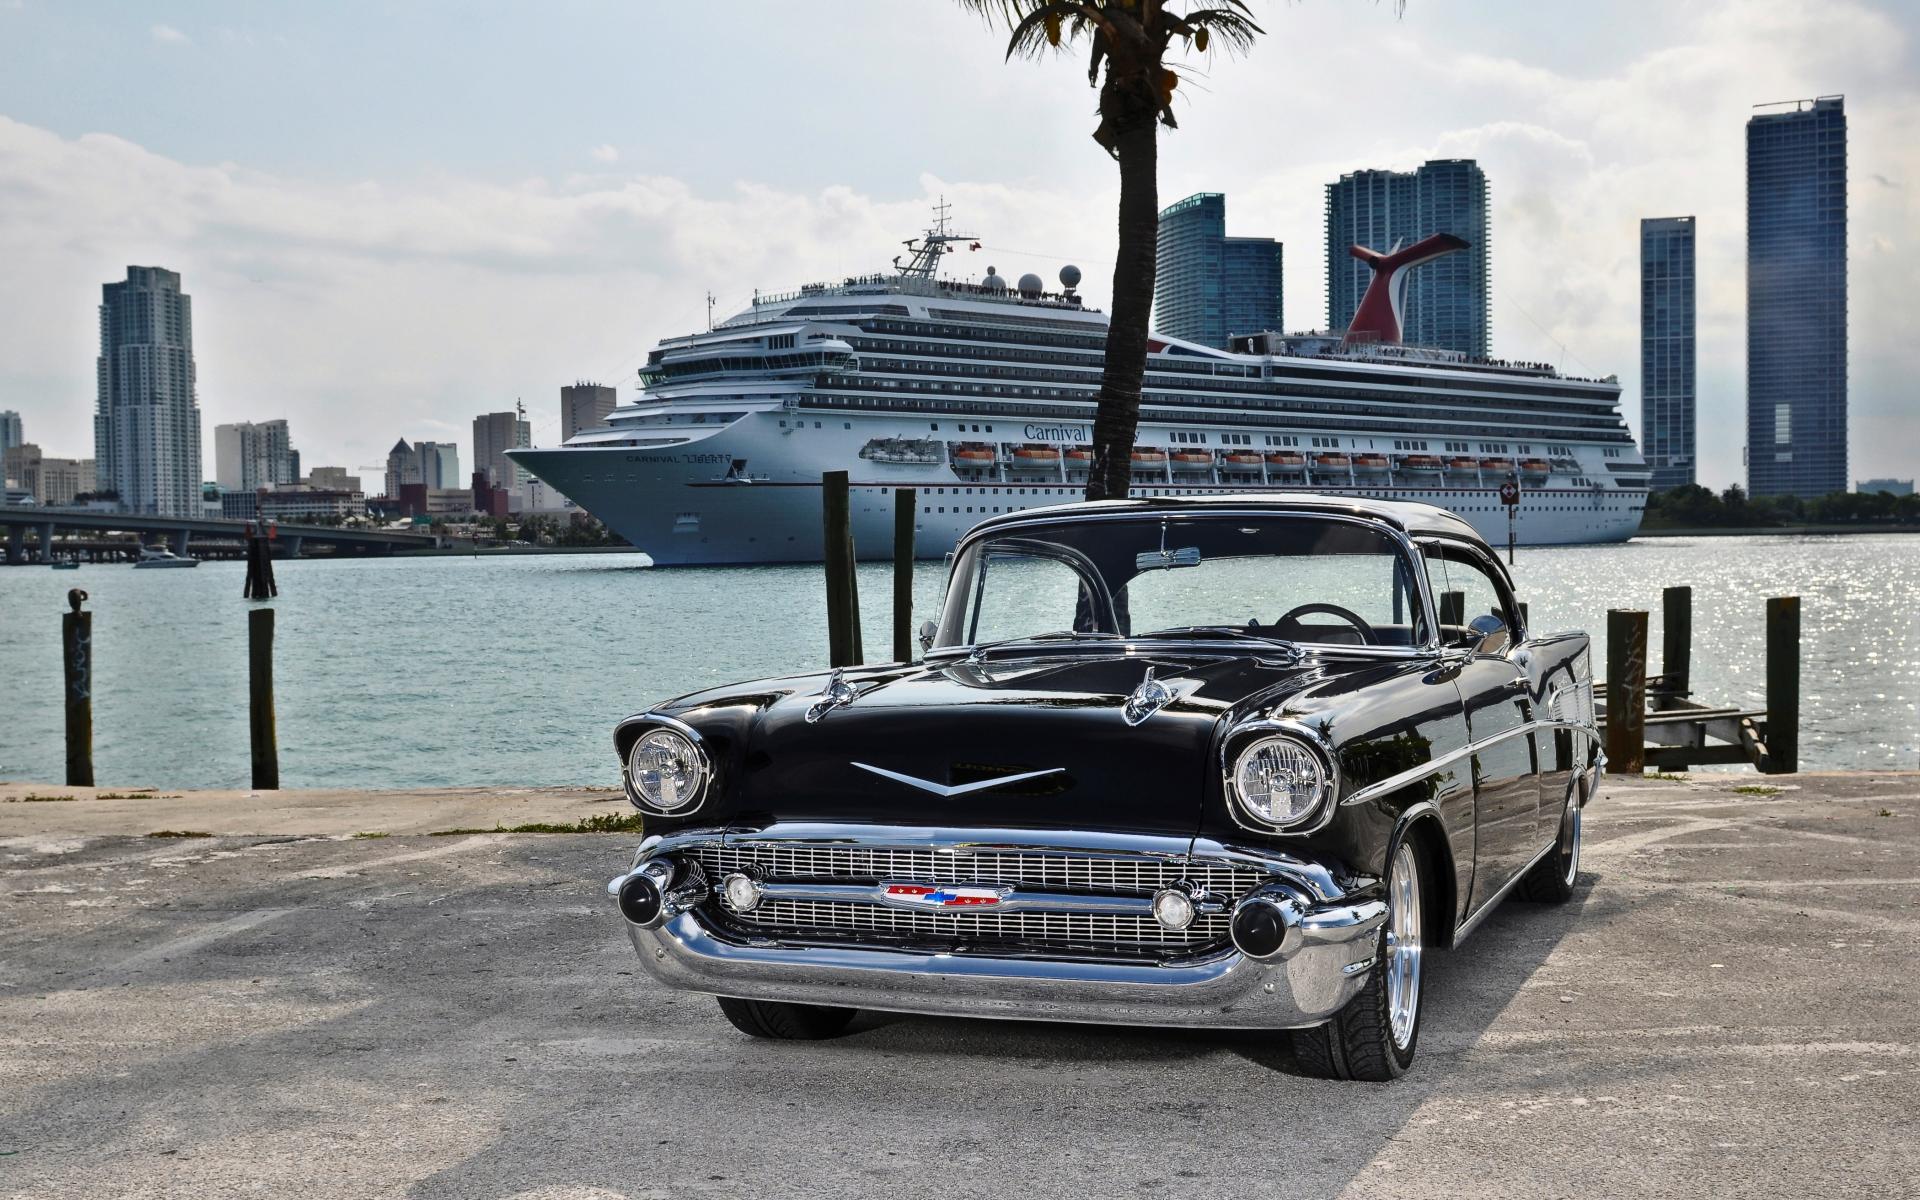 1954, Chevrolet, Bel, Air, Chevy, Auto, Retro, Classic, Ships, Boats, Cities, Buildings, Skyscrapers Wallpaper